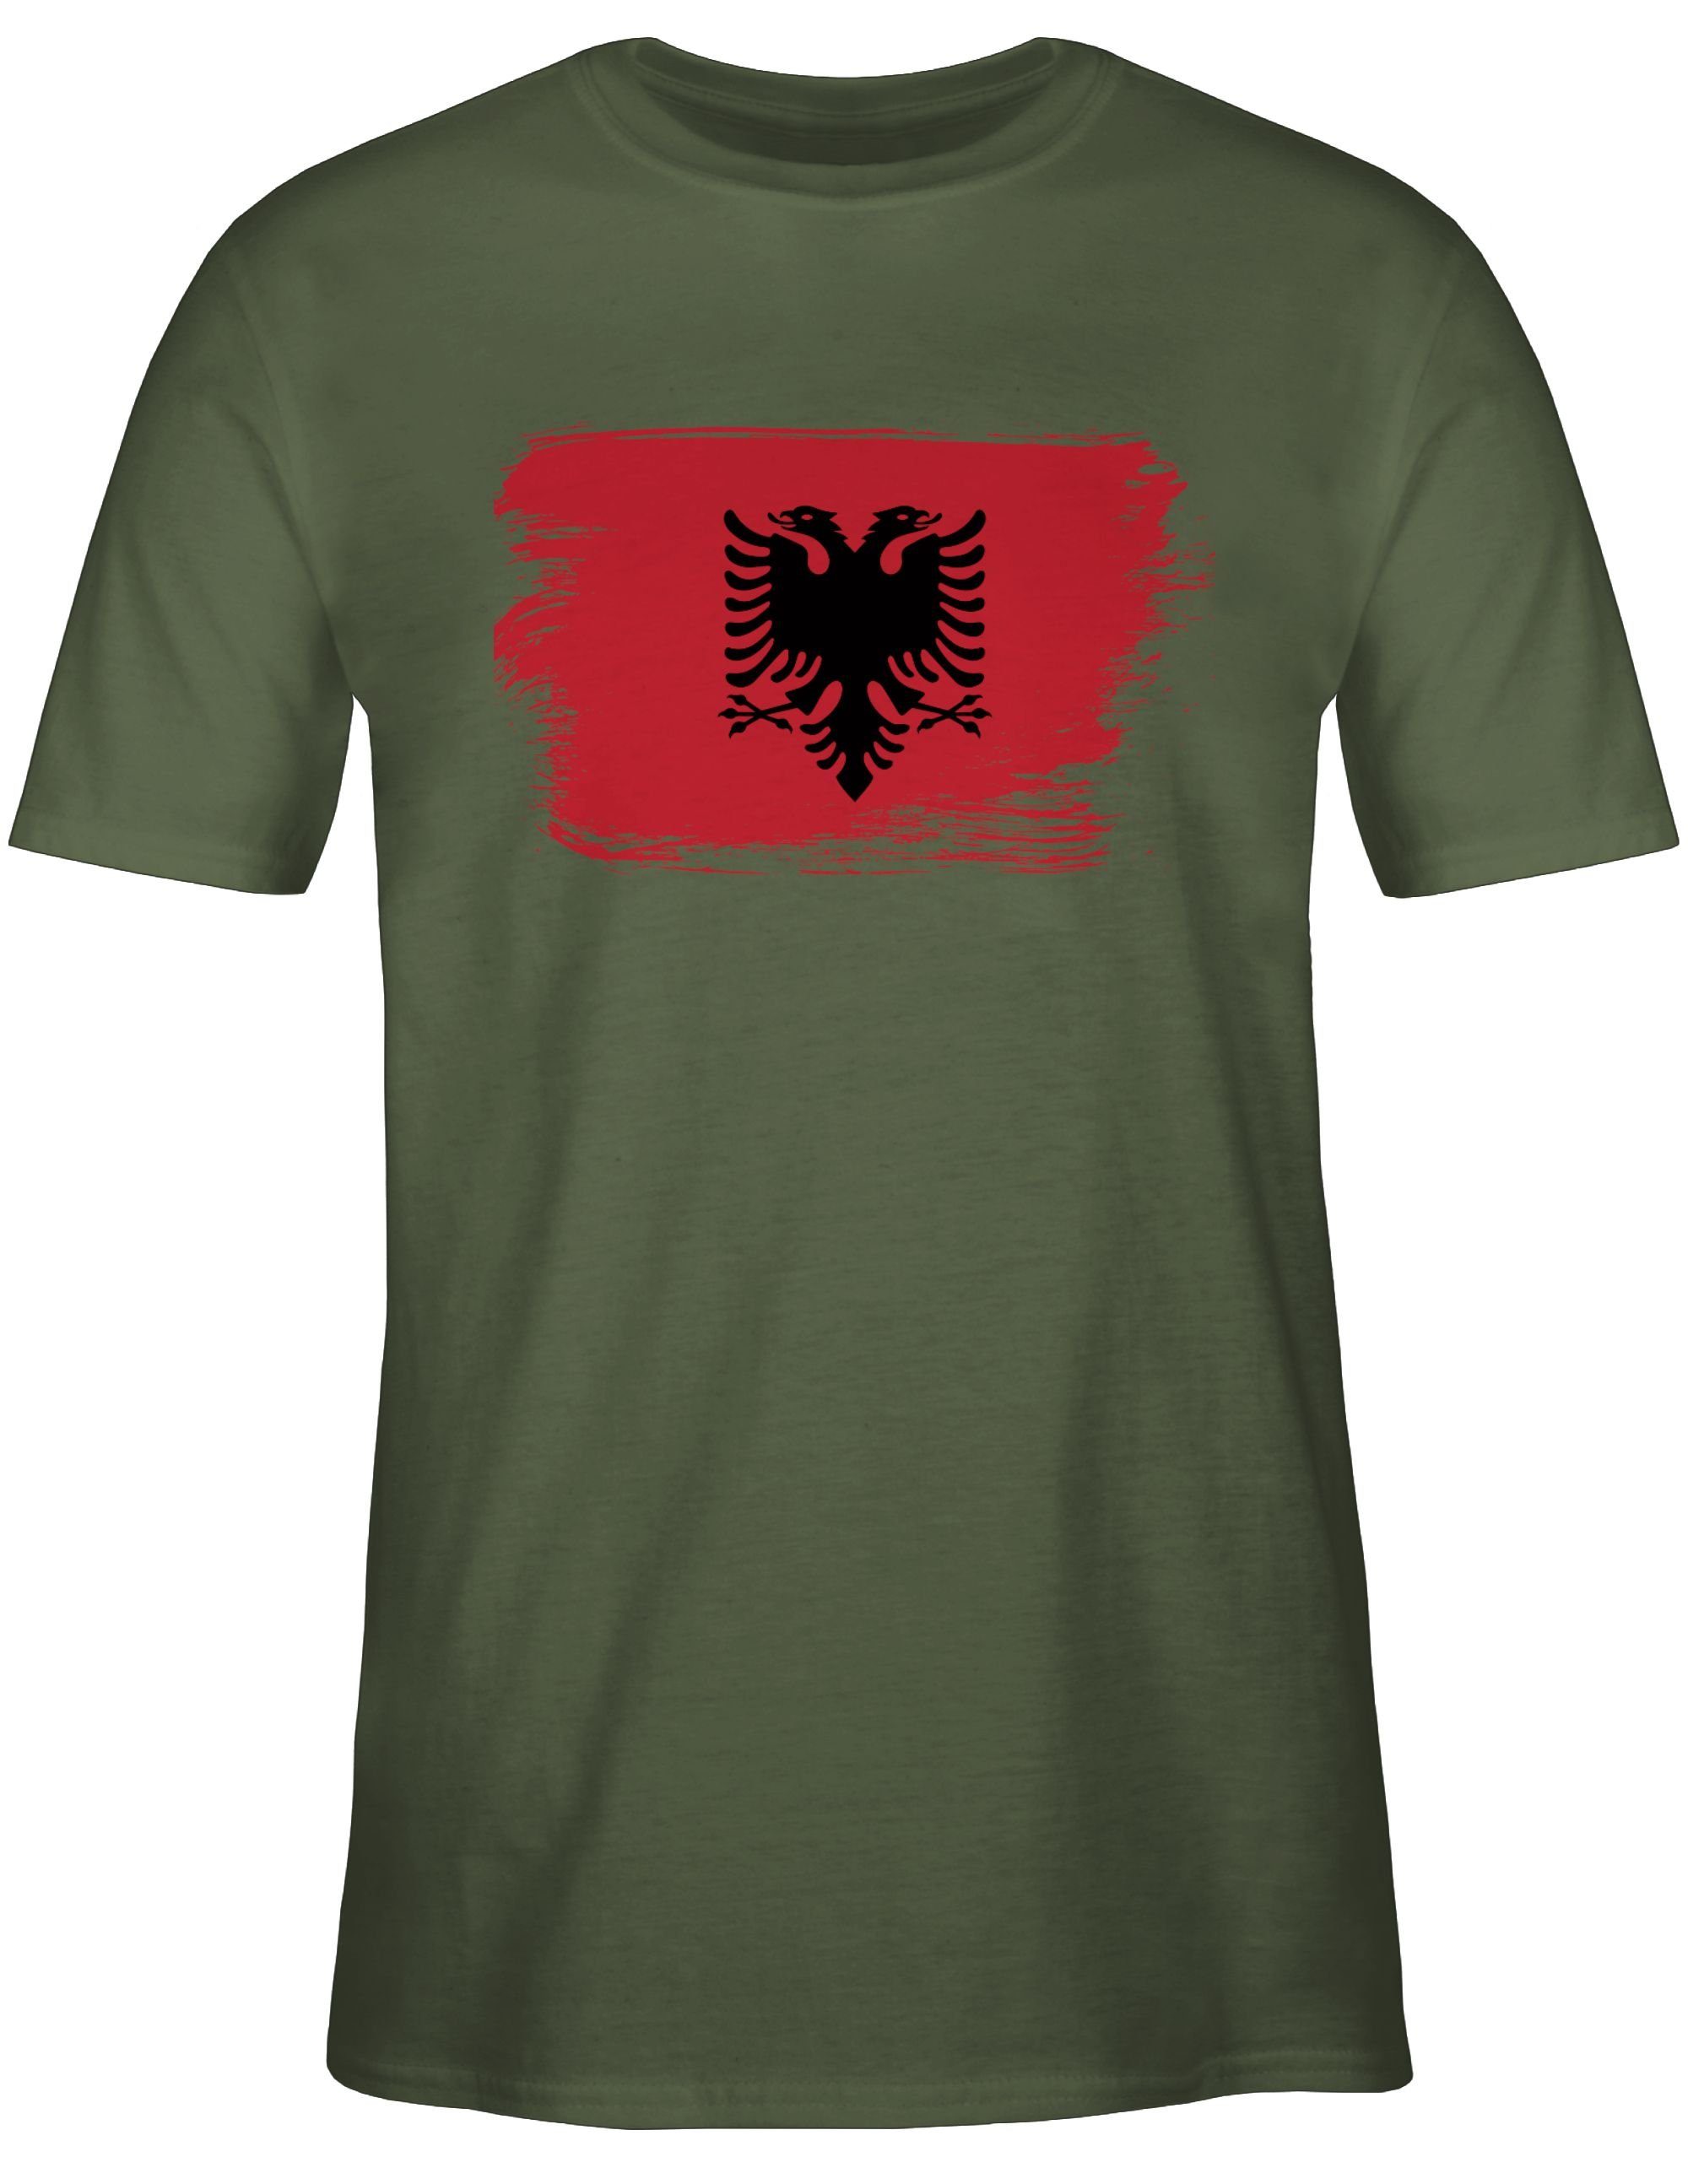 City T-Shirt Army Flagge Outfit 2 Stadt Shirtracer und Vintage Albanien Grün